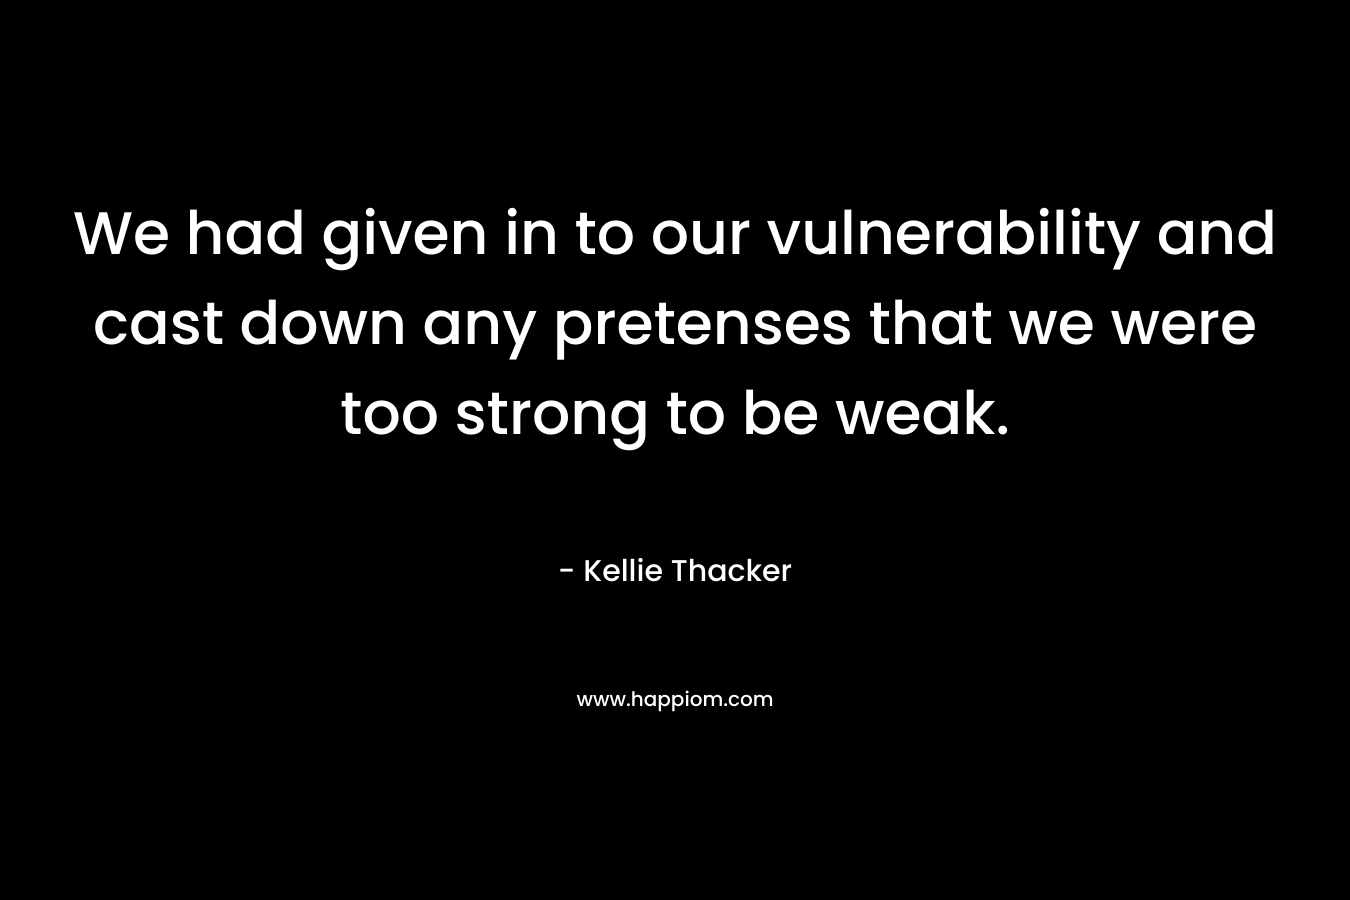 We had given in to our vulnerability and cast down any pretenses that we were too strong to be weak.